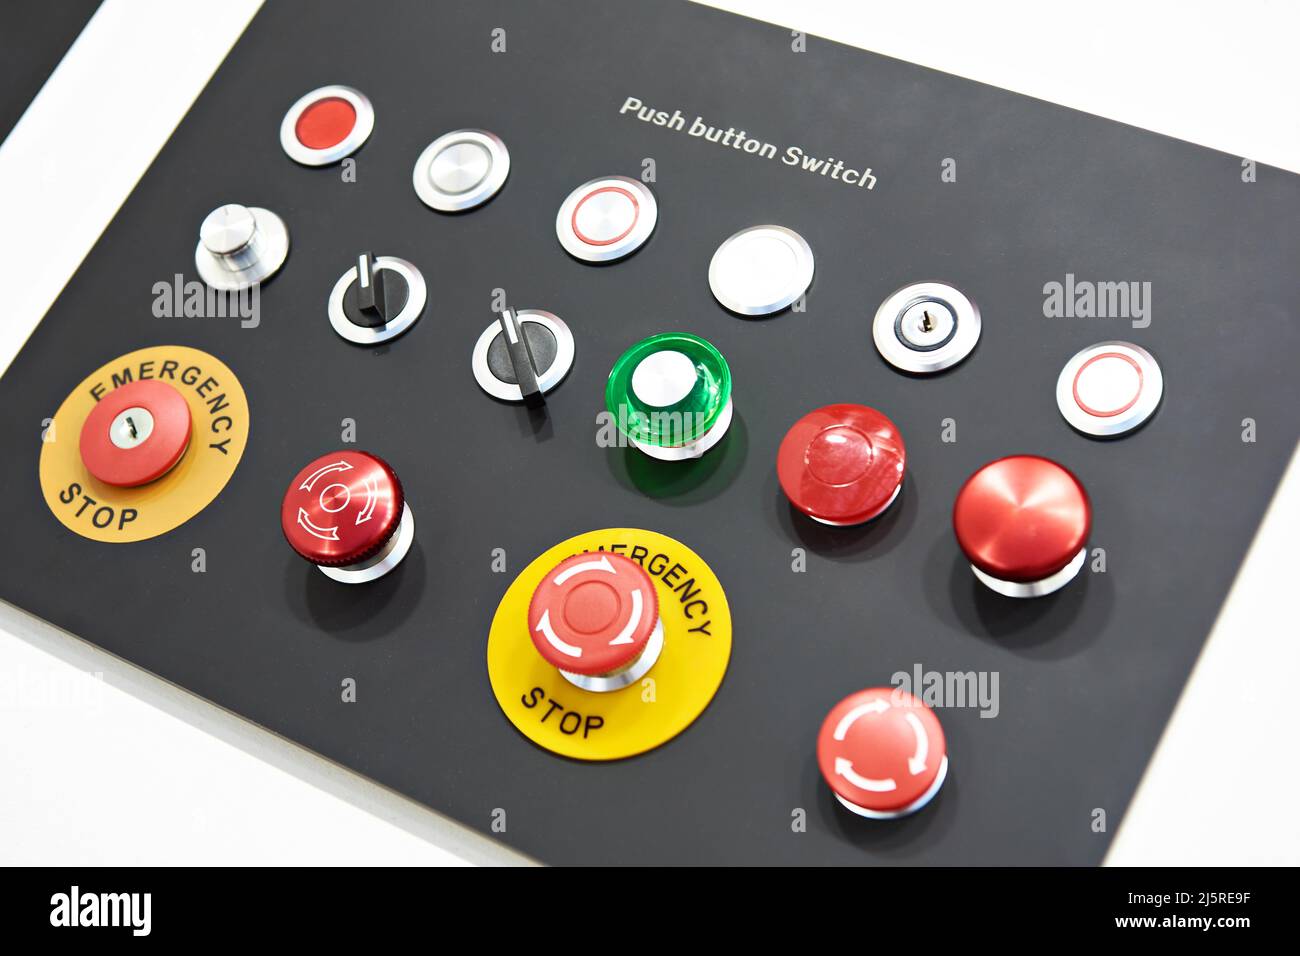 Buttons for control panels for electrical equipment Stock Photo